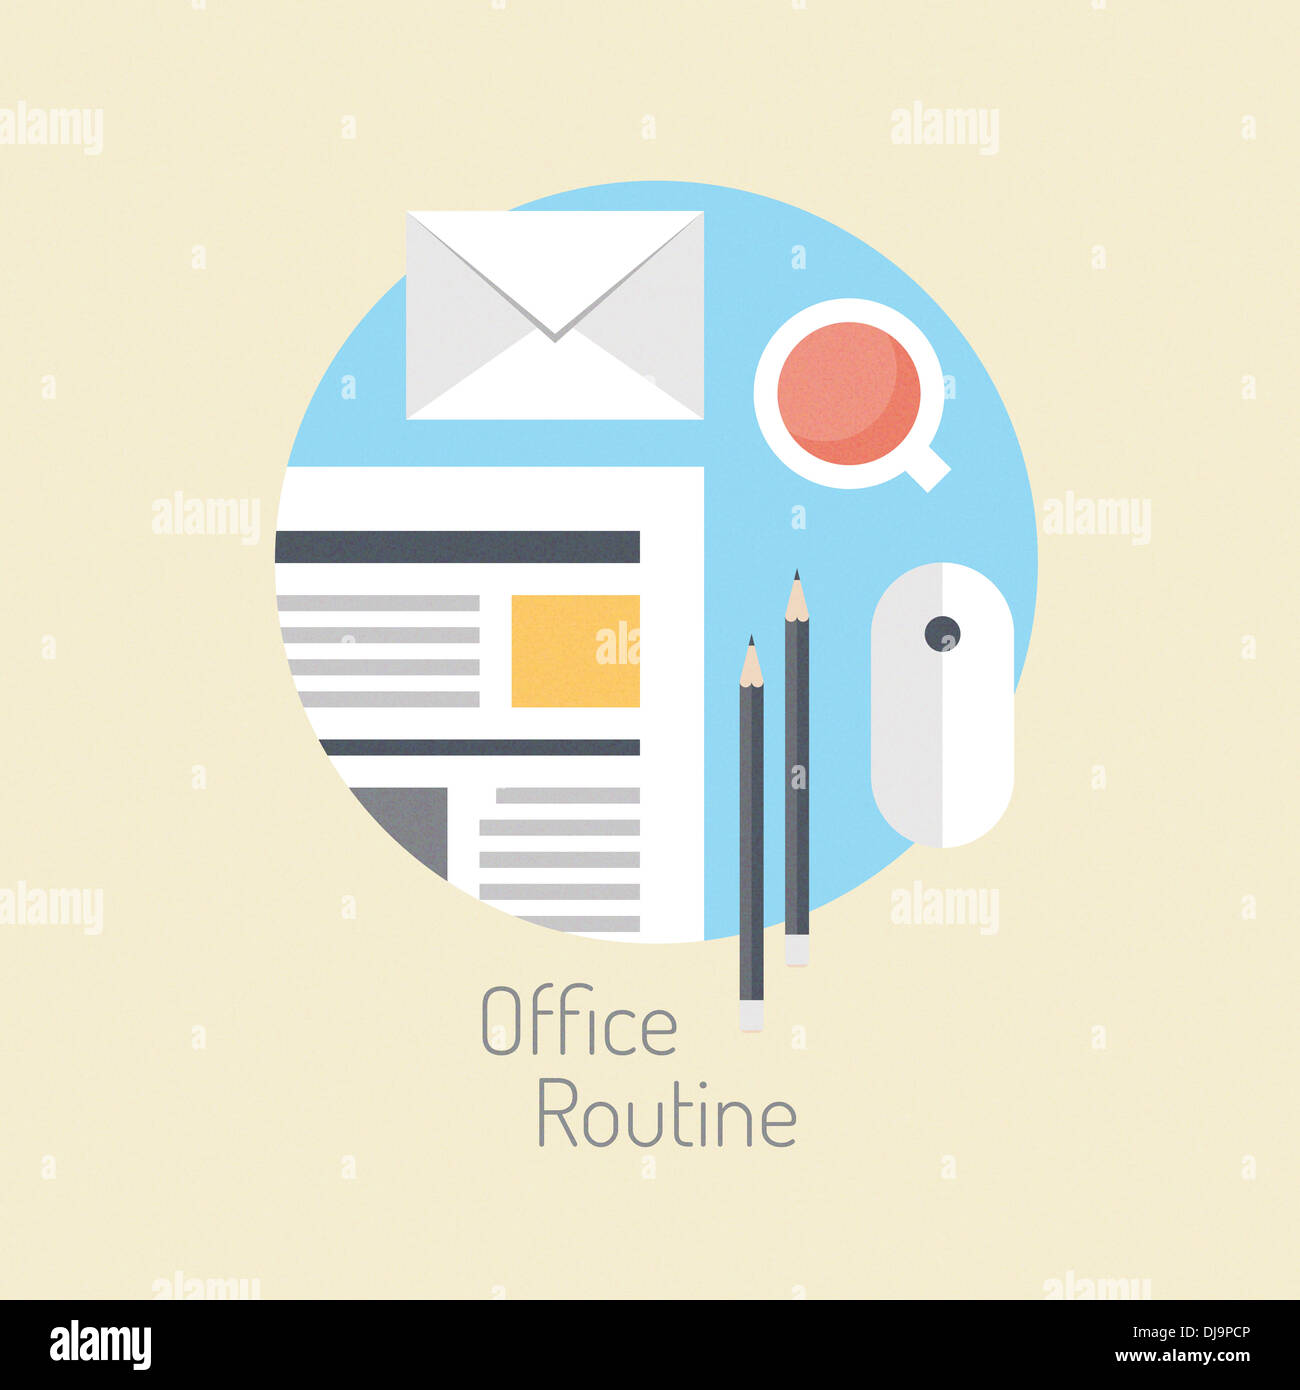 Flat design illustration concept of modern office workflow, business lifestyle and routine office daily activity poster Stock Photo